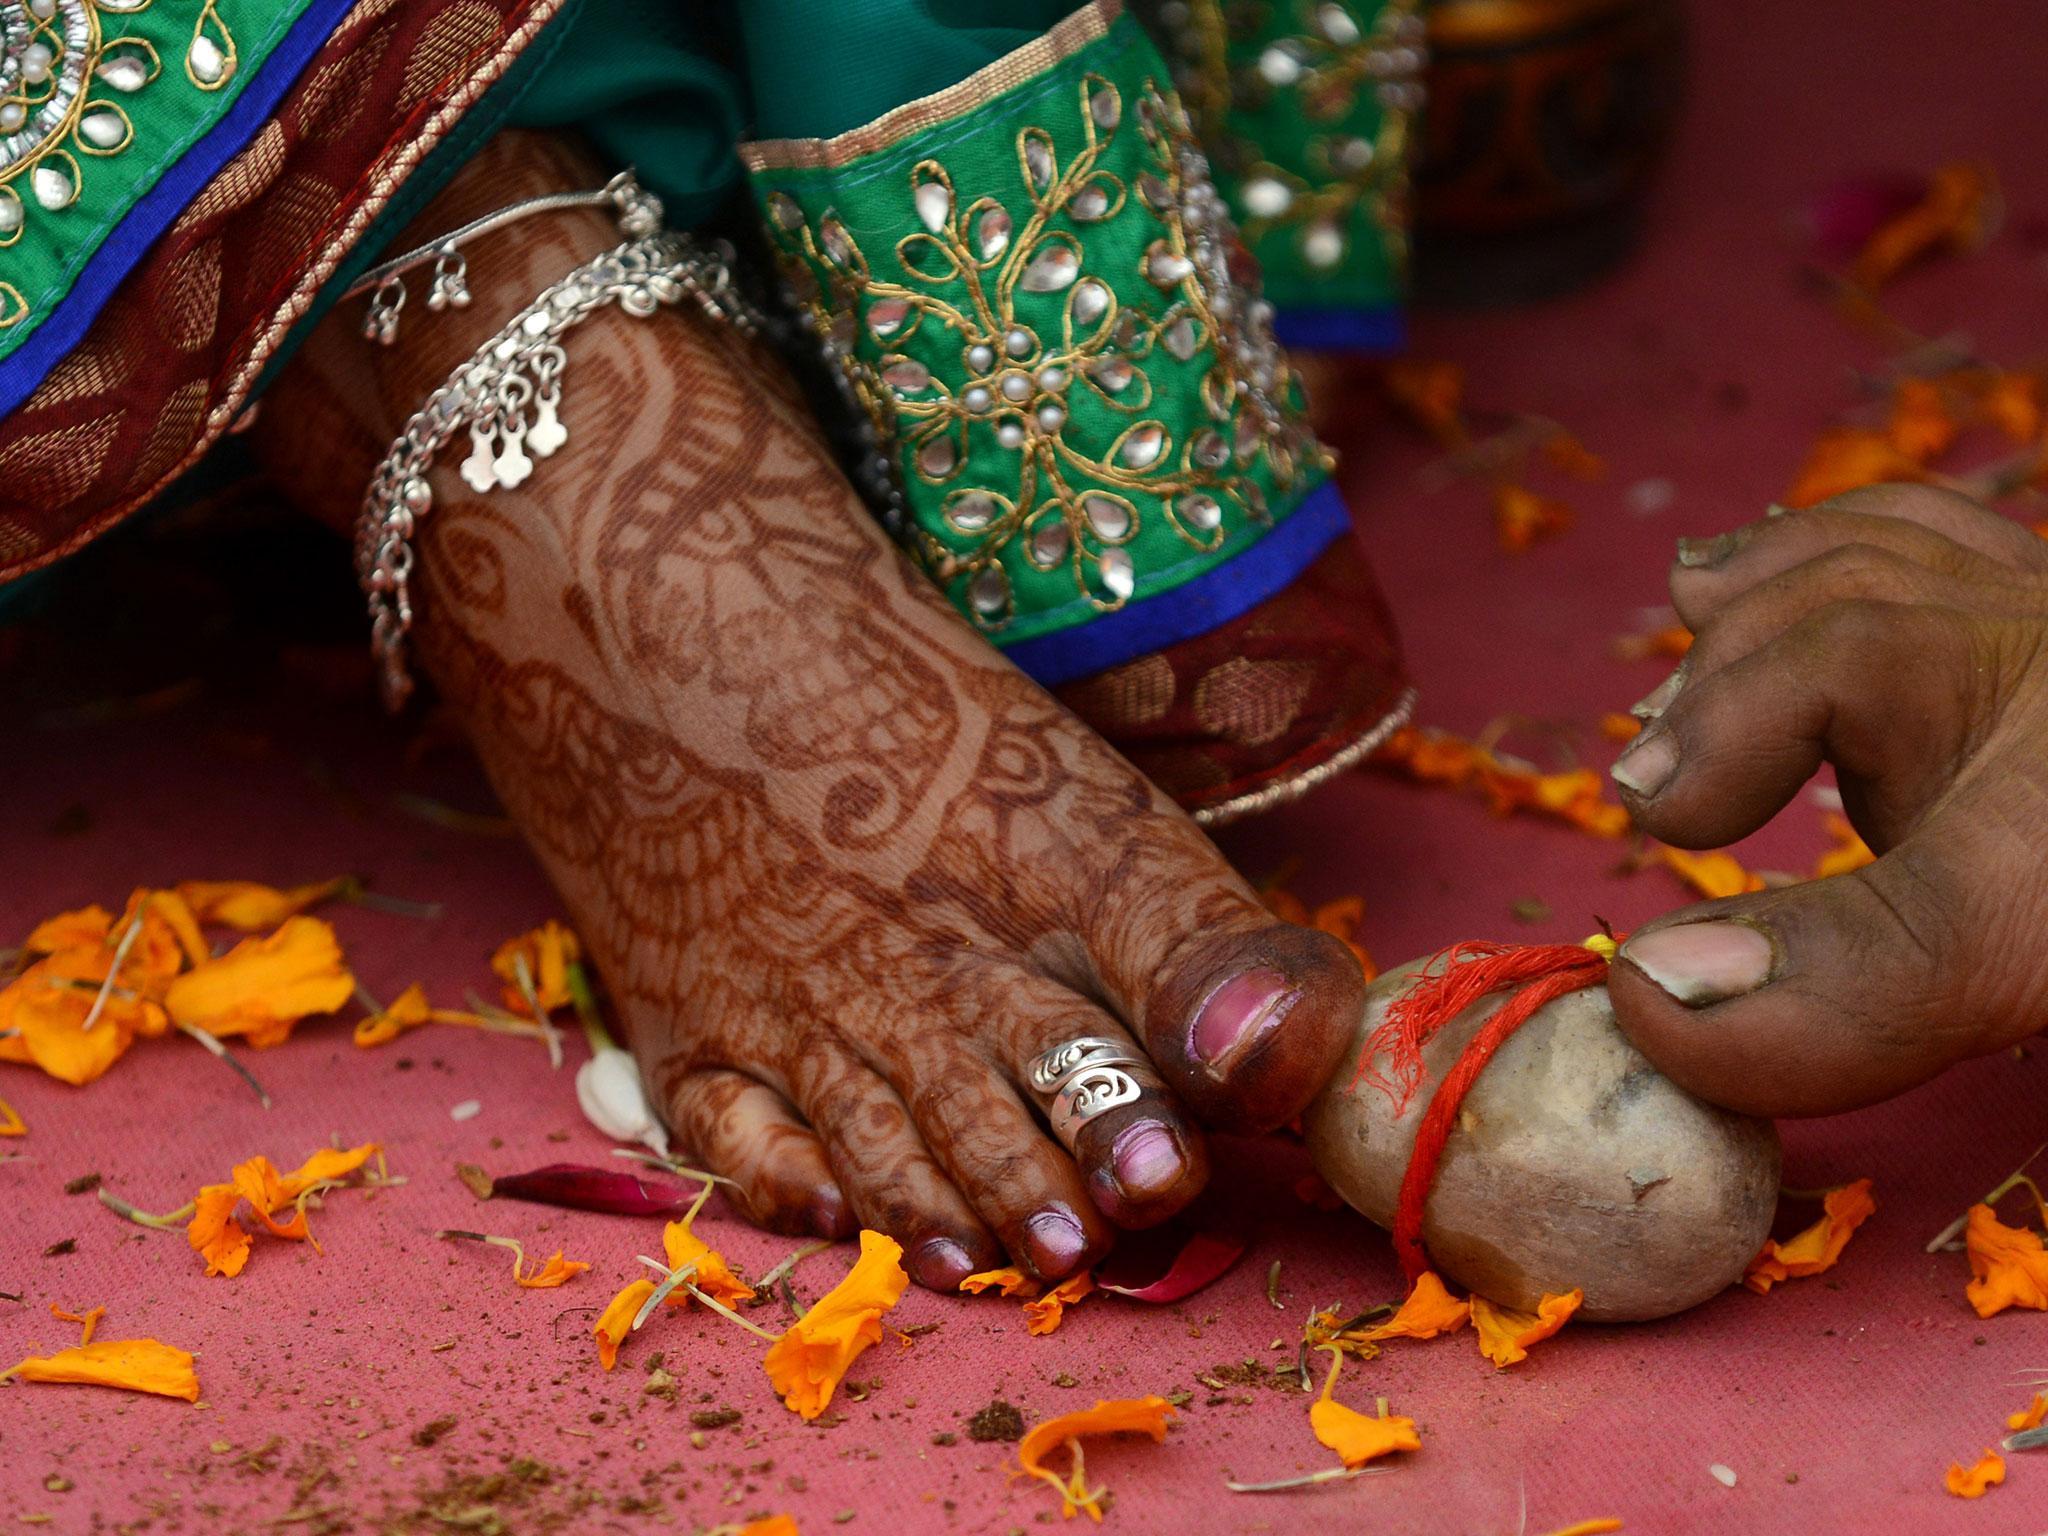 The intended couple were starting traditional rituals when the groom had a seizure